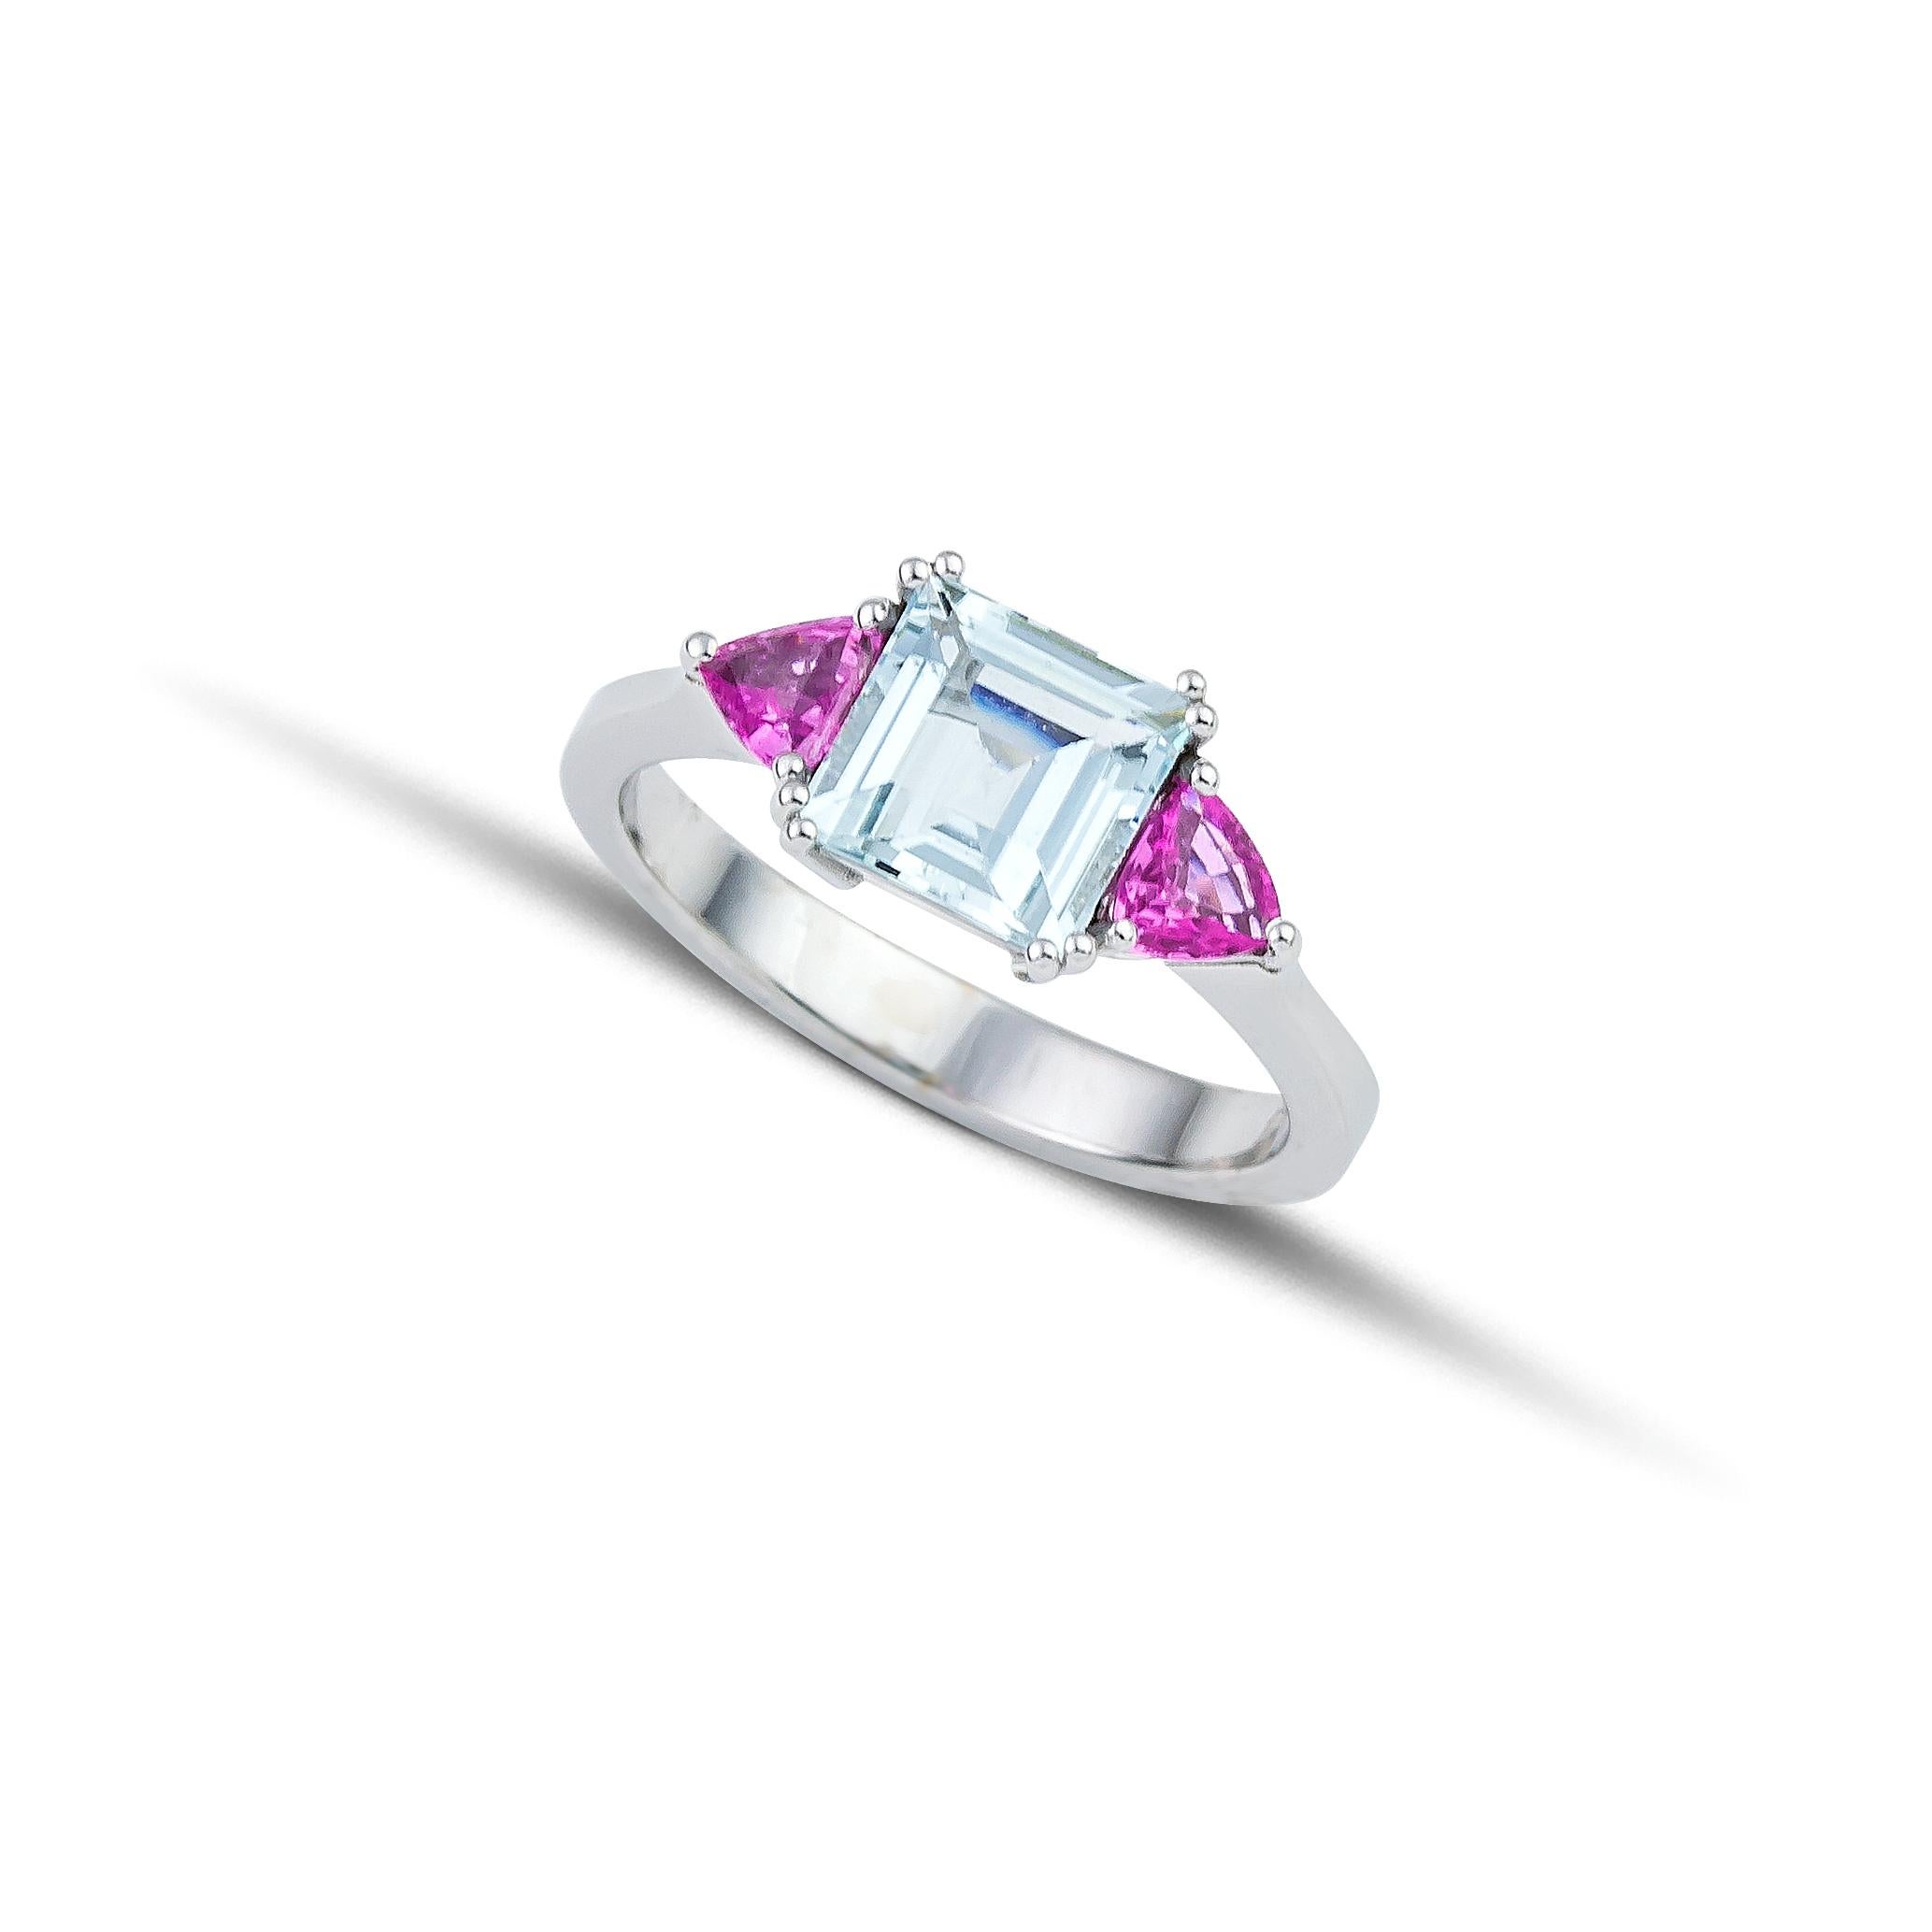 Unique coctail ring made of 18Kt white gold with an Square Cut Aquamarine and two trillion Pink Sapphires. The Aquamarine is carefully set among  double claw prongs and theTrillion Pink Sapphires are set among three gold prongs. This simple but